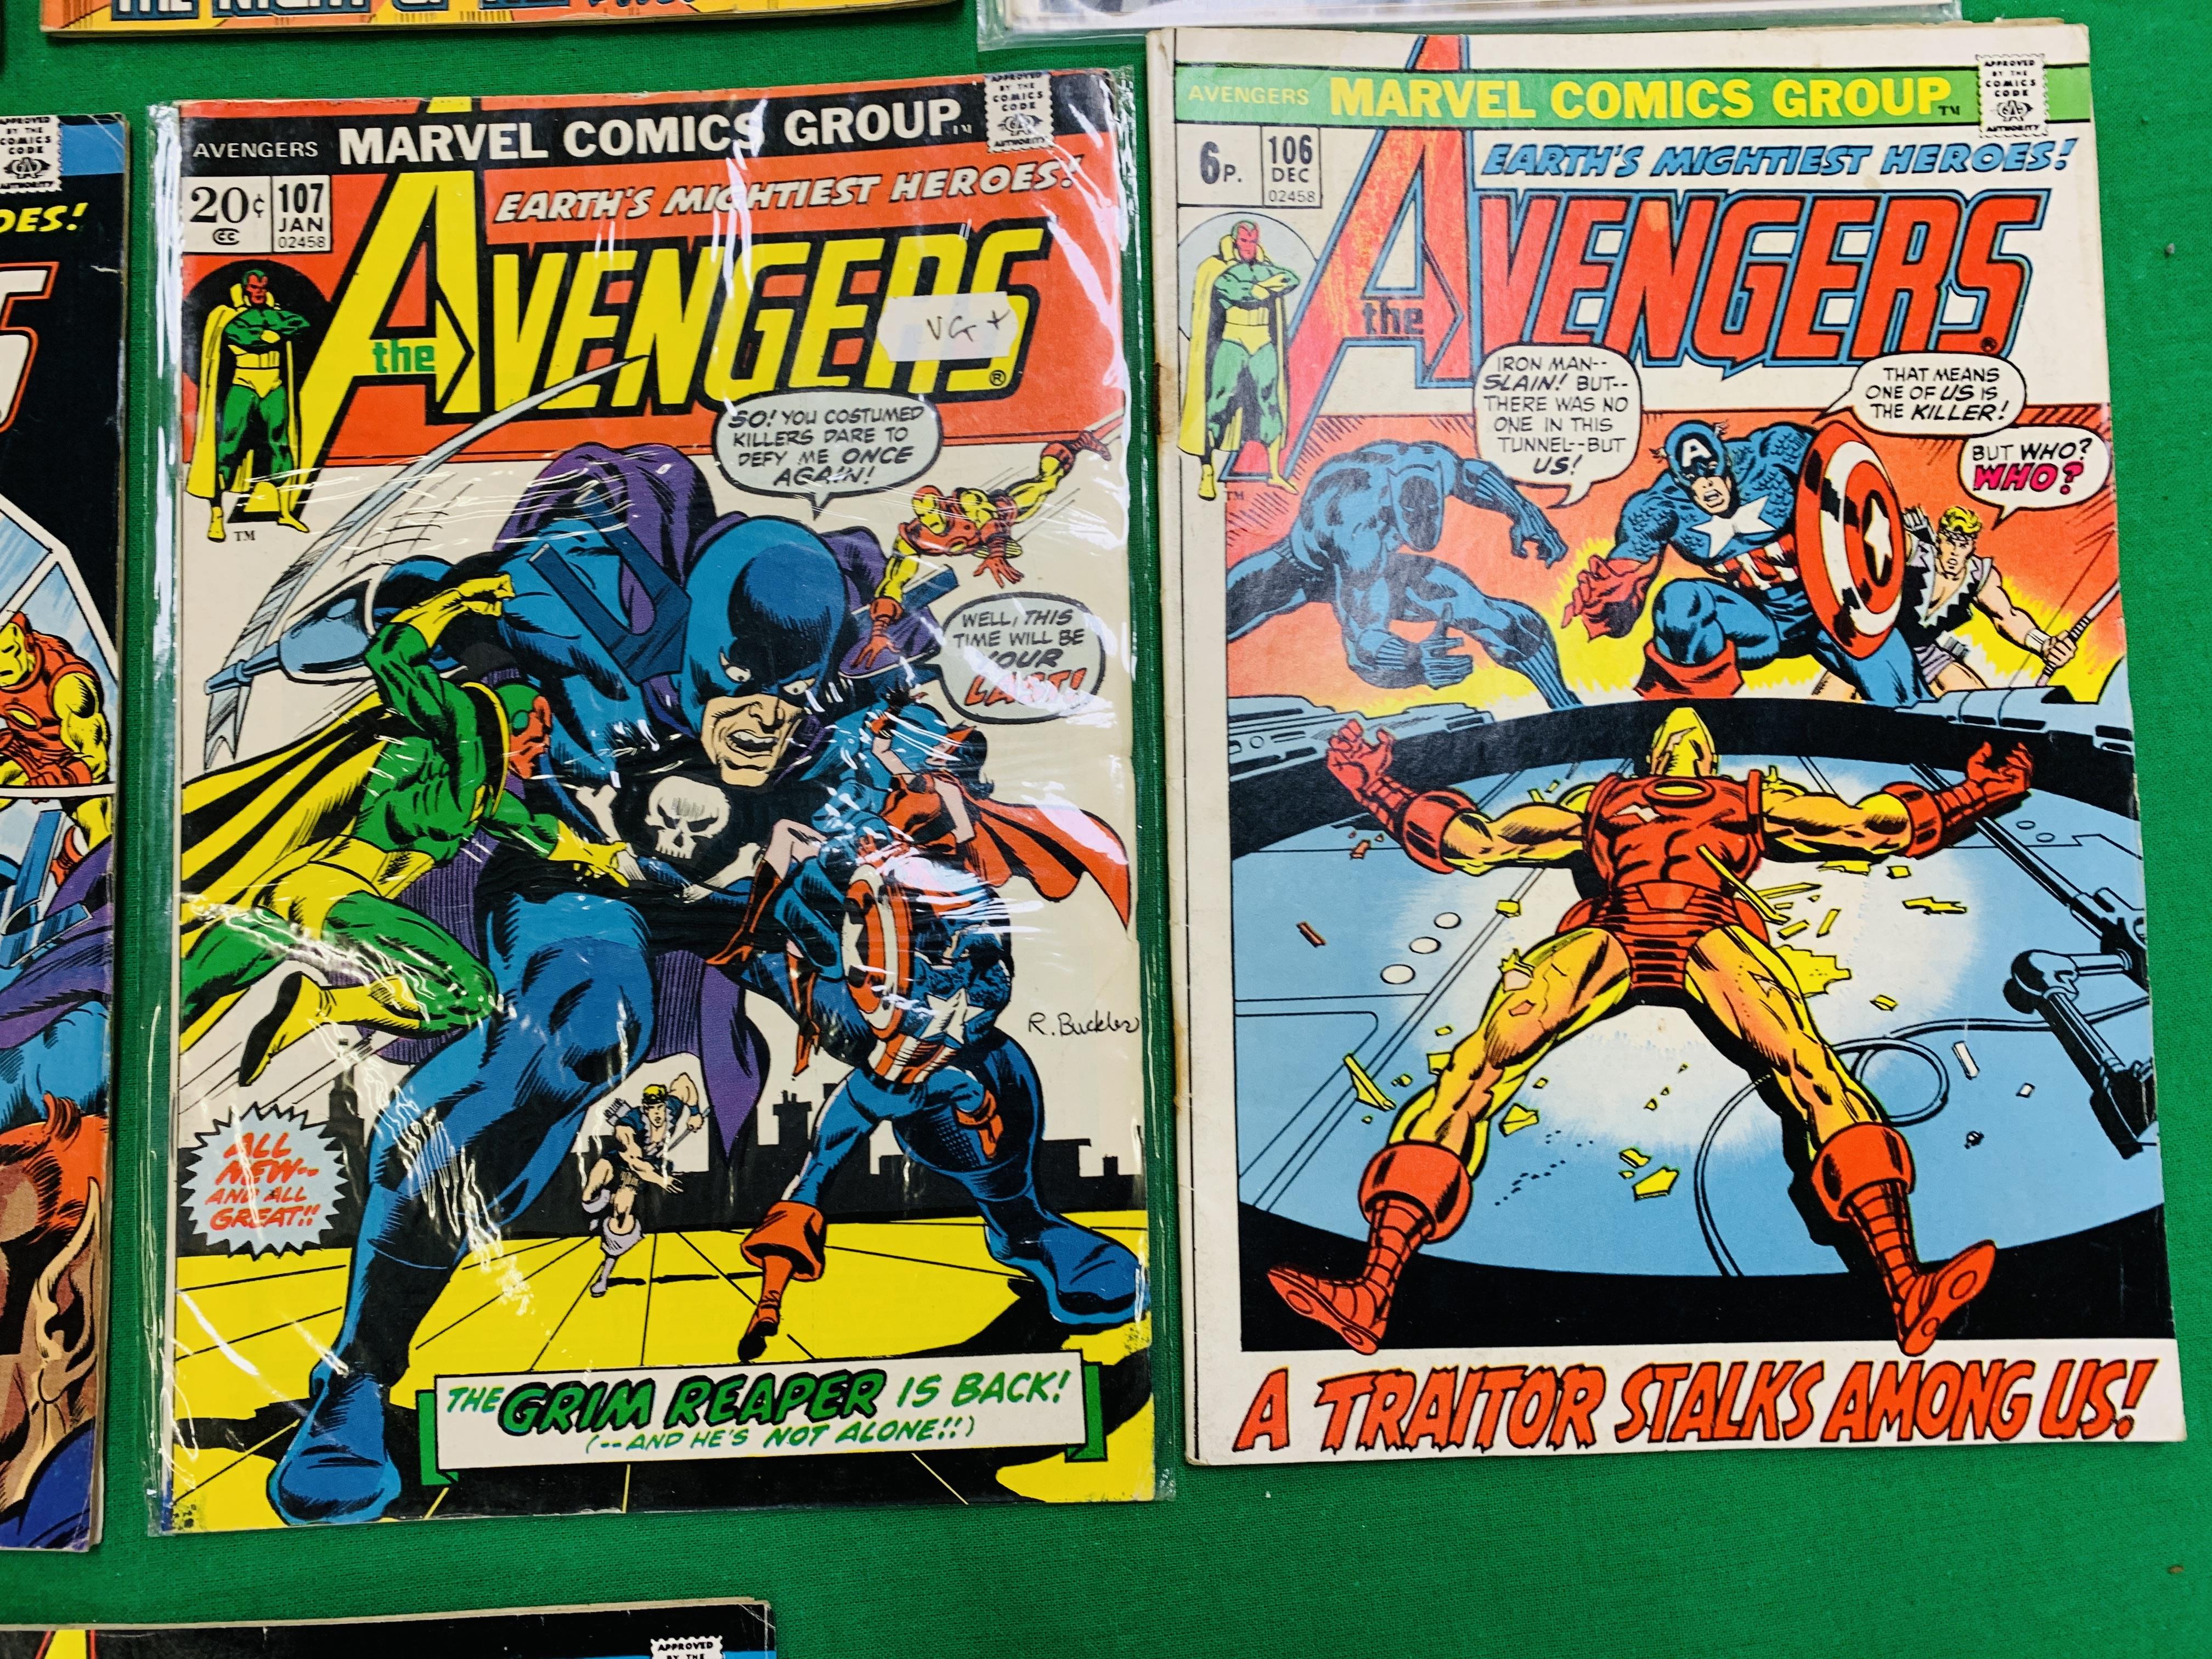 MARVEL COMICS THE AVENGERS NO. 101 - 299, MISSING ISSUES 103 AND 110. - Image 6 of 130